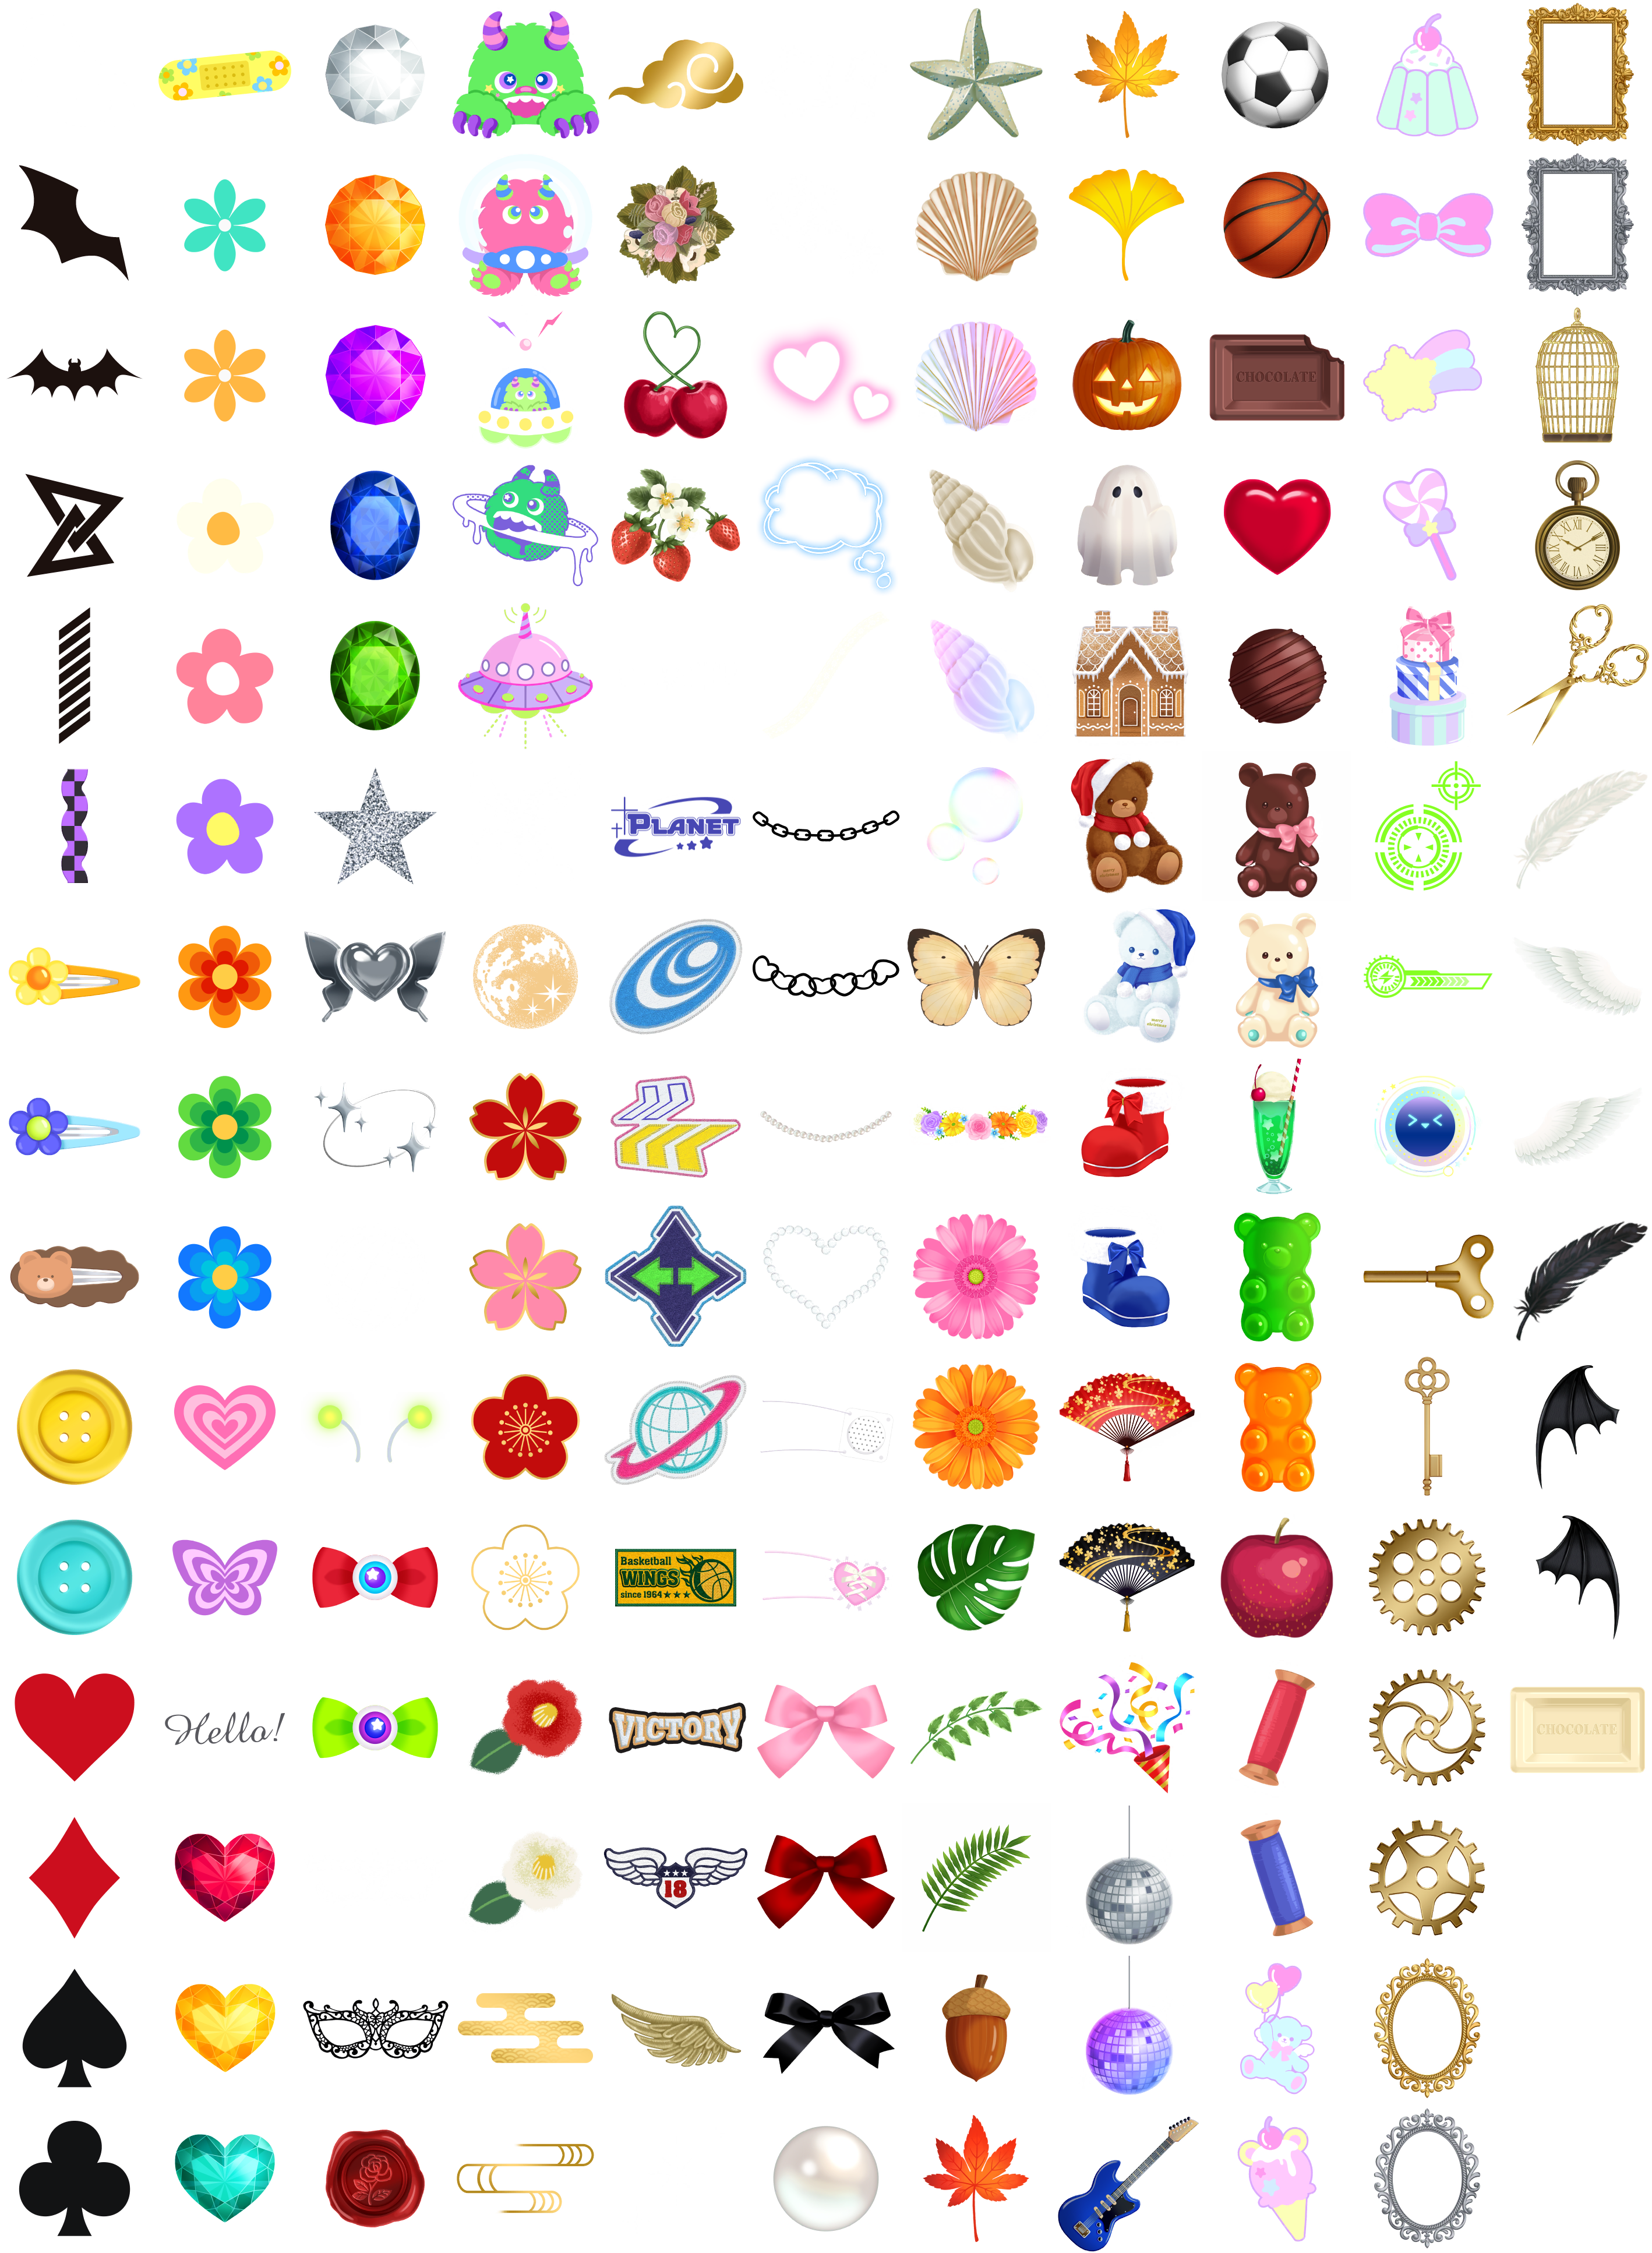 Stamps (1.4.0)